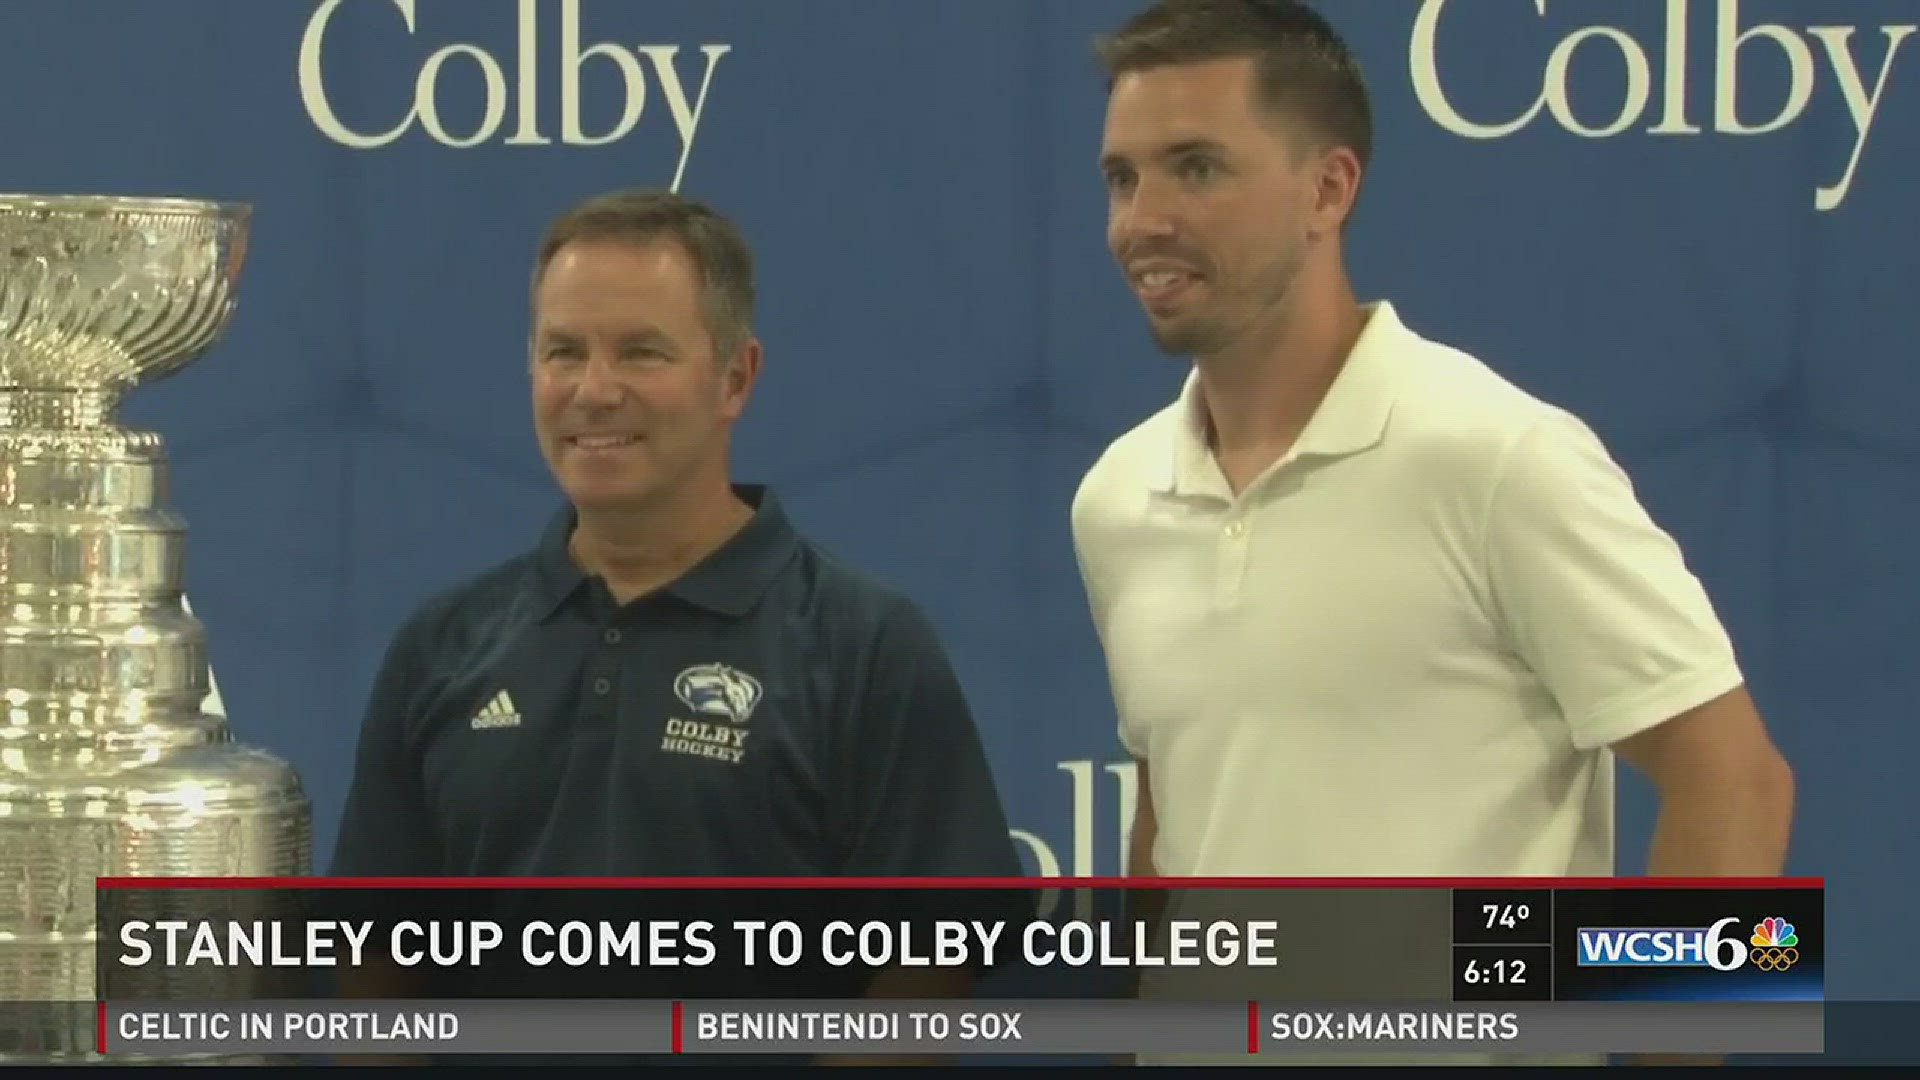 Stanley Cup comes to Colby College